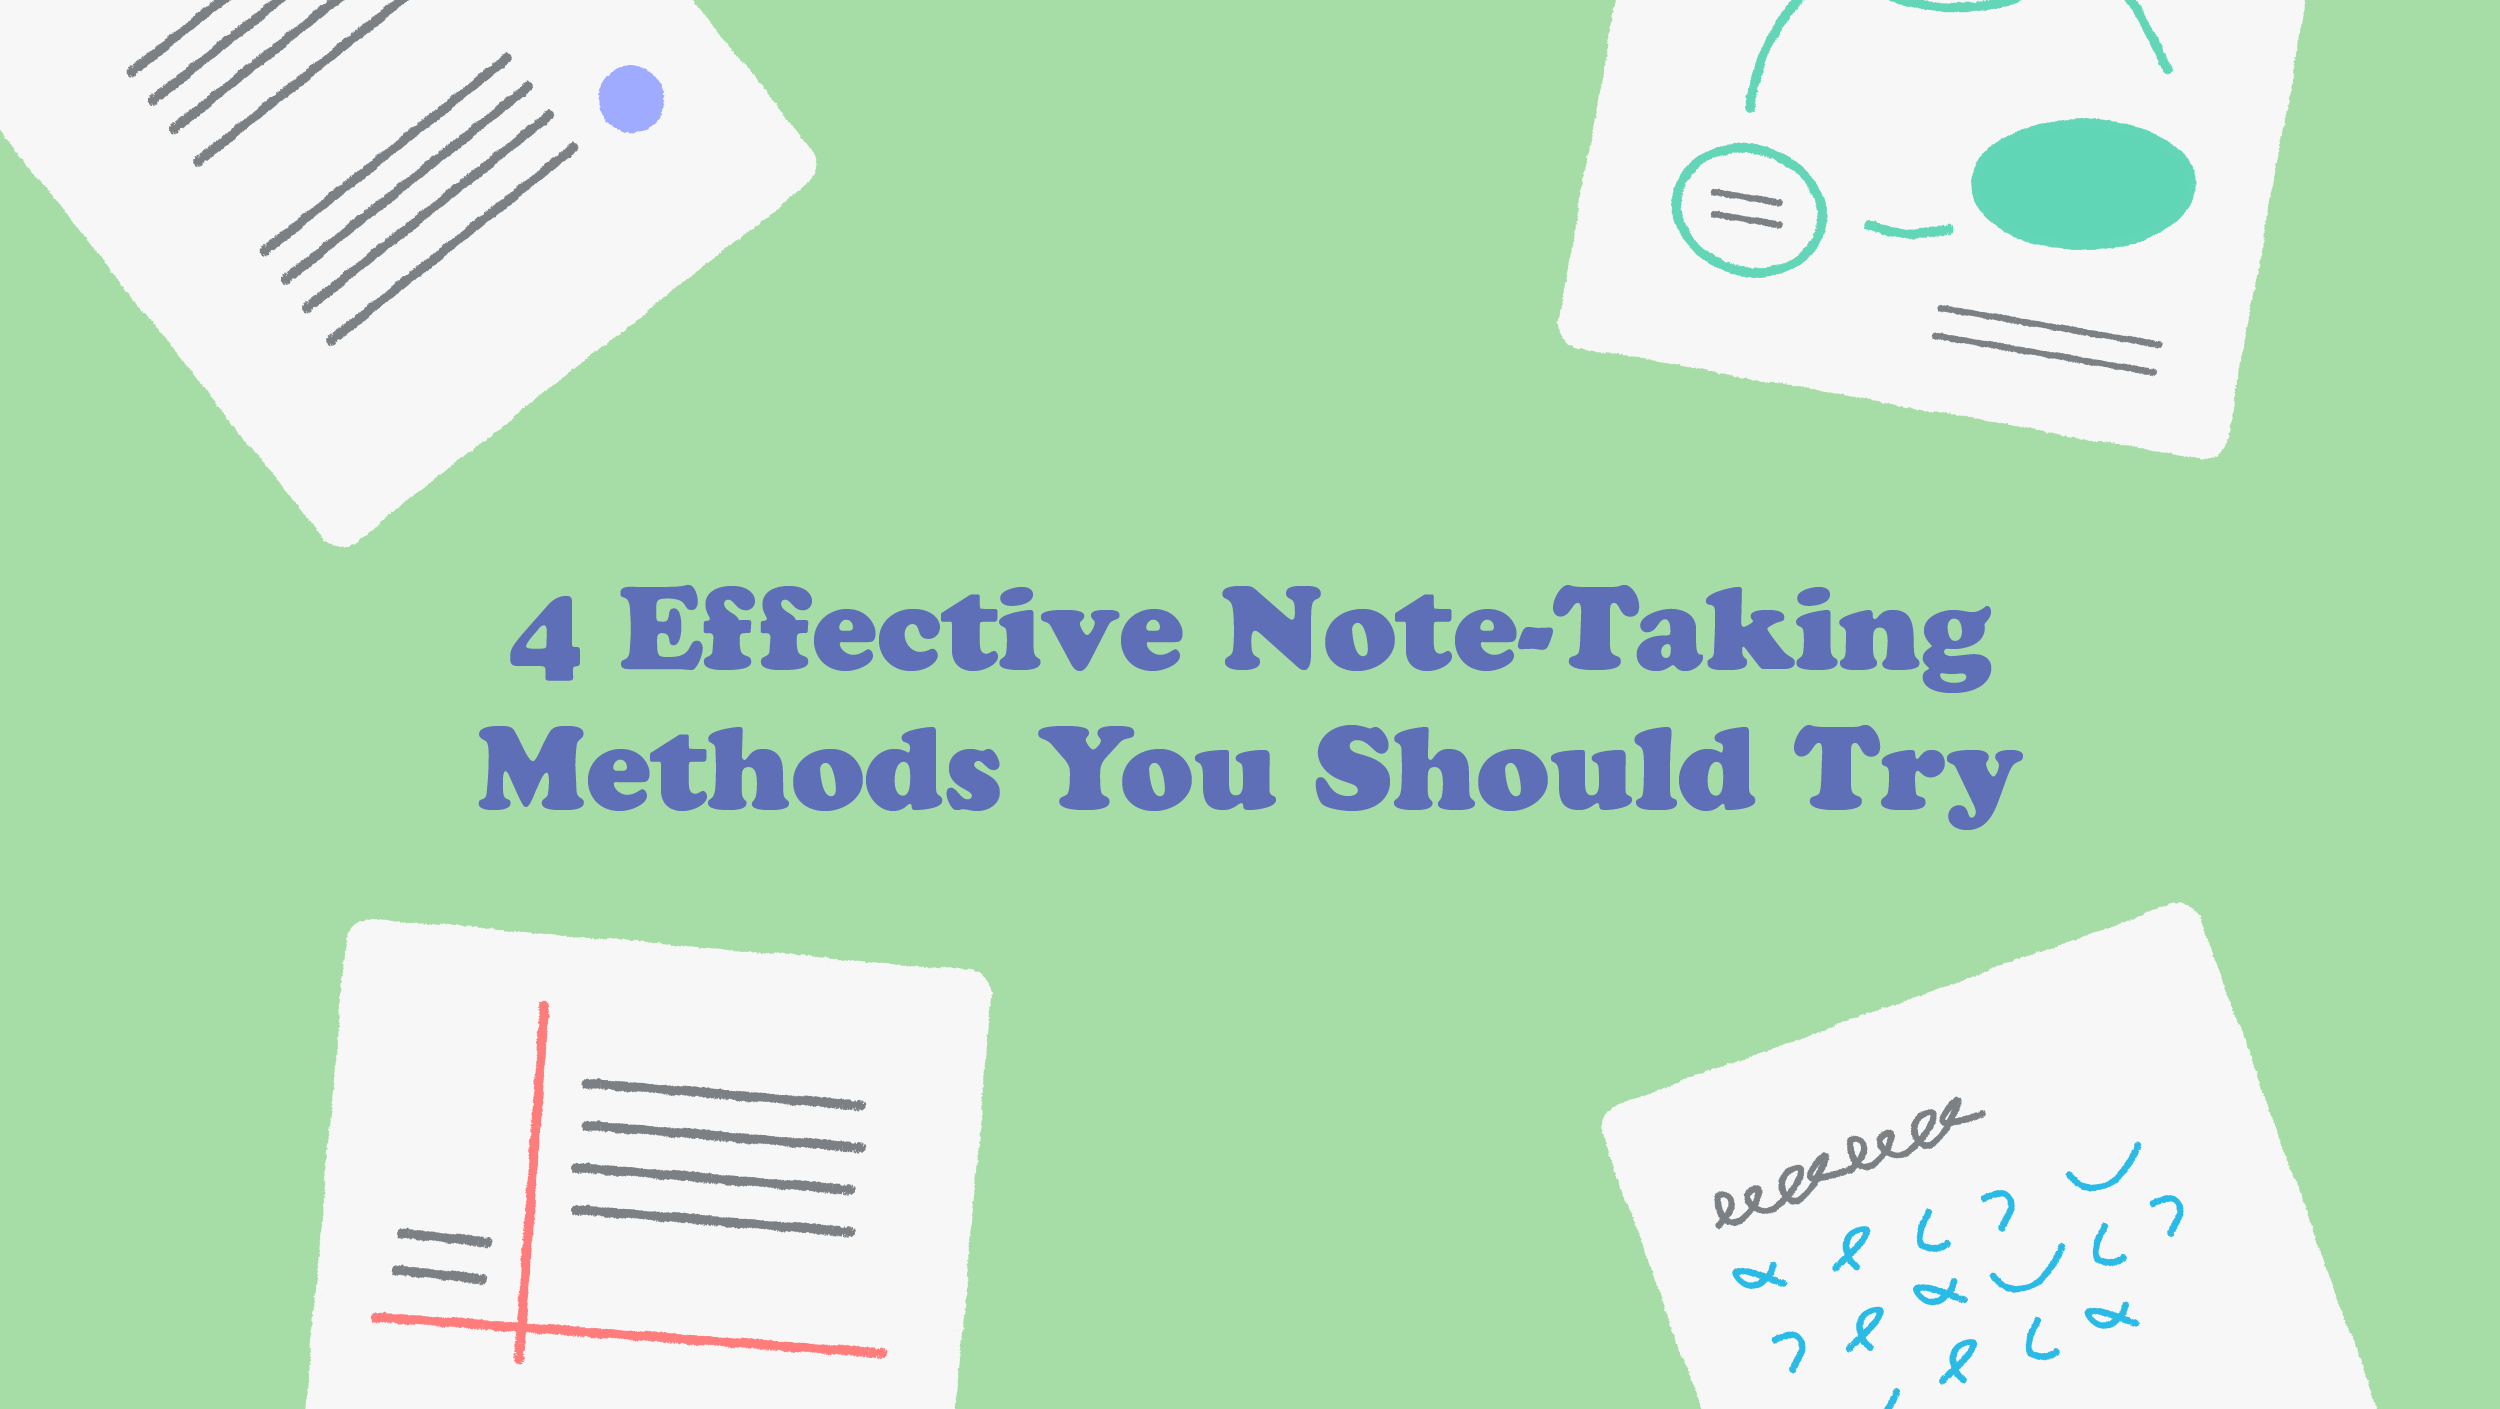 http://cdn.shopify.com/s/files/1/0656/3139/files/4_Effective_Note_Taking_Methods_You_Should_Try_Blog-01.png?v=1595909589